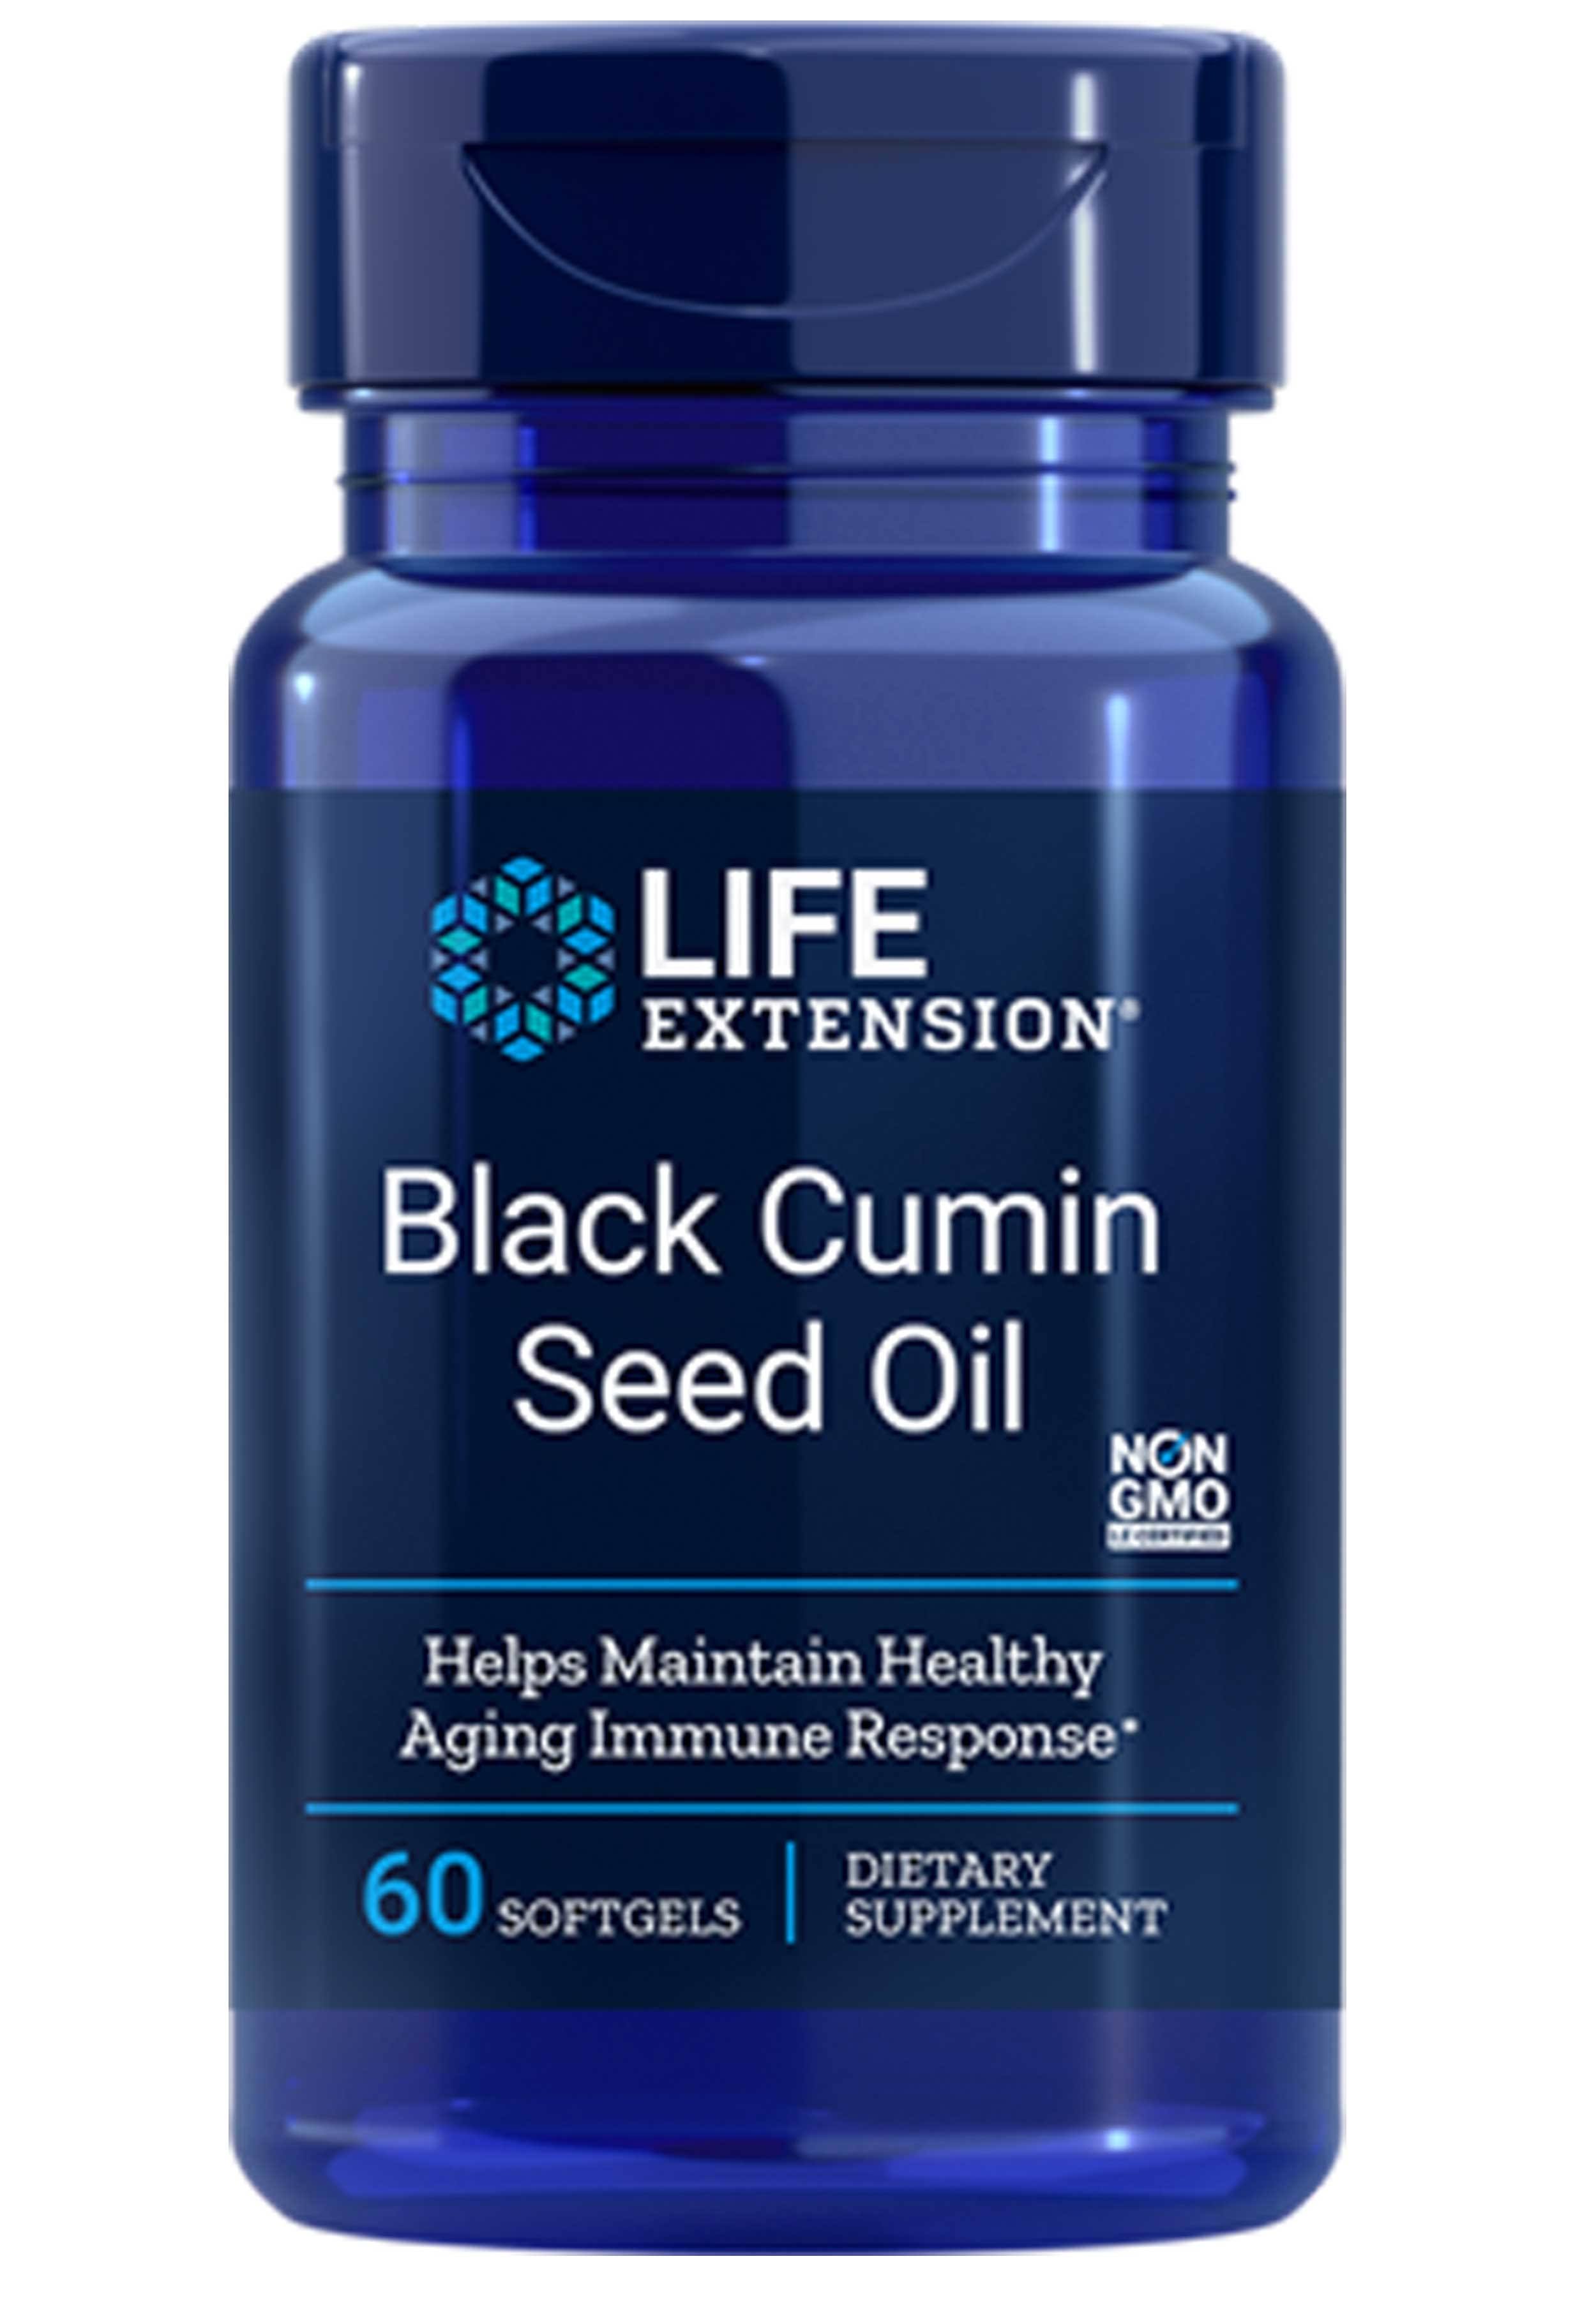 Life Extension Black Cumin Seed Oil Supplement - 60 Softgels